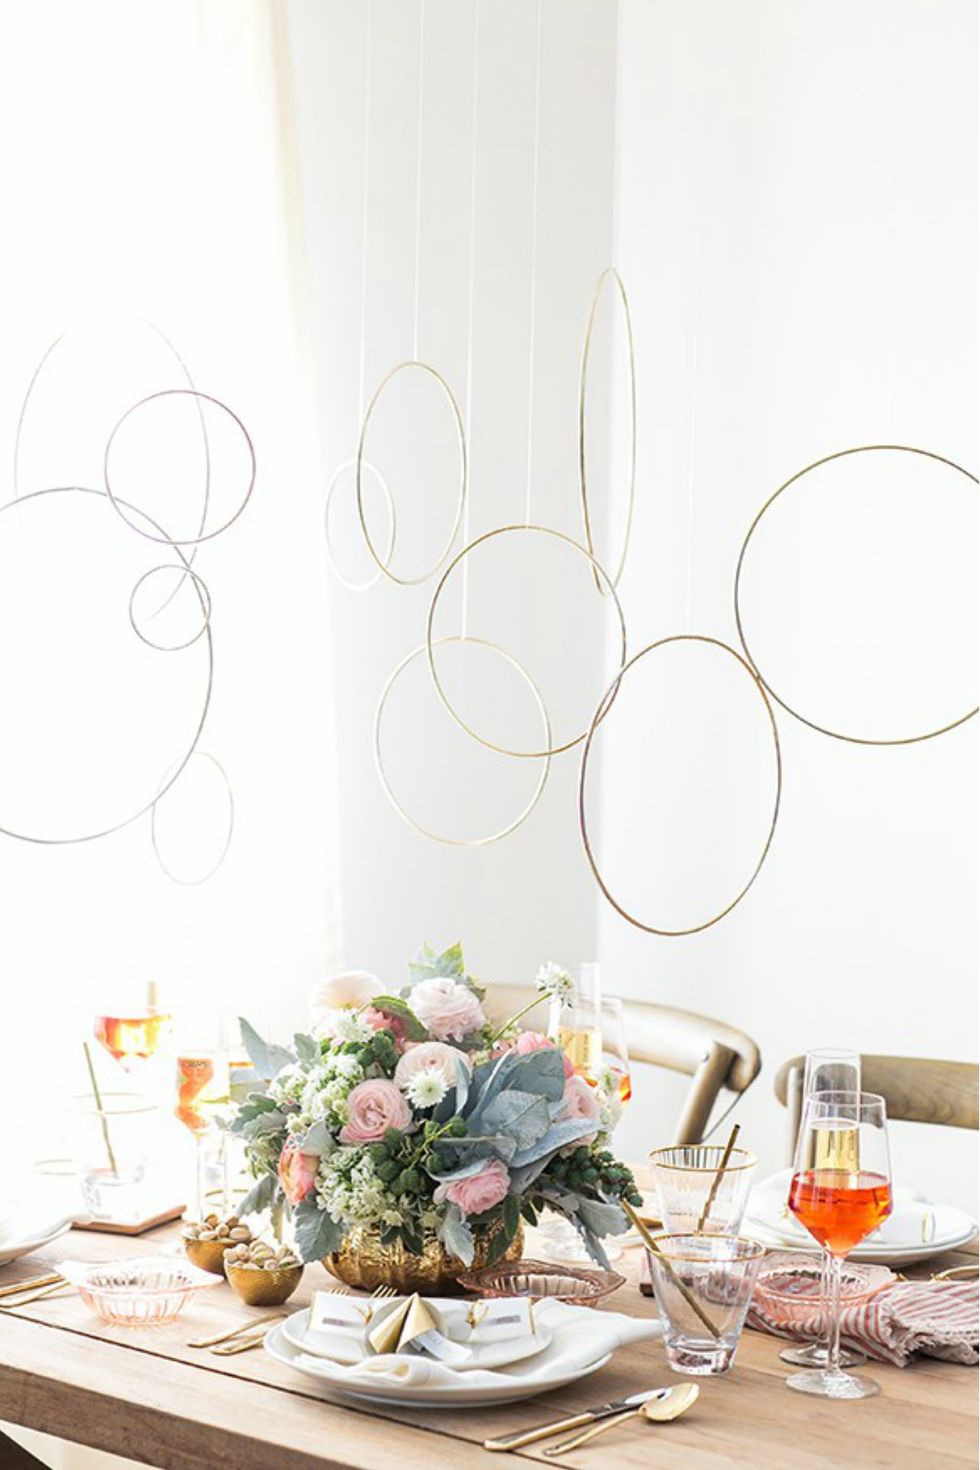 New Years Eve Table Decorations diy chandelier